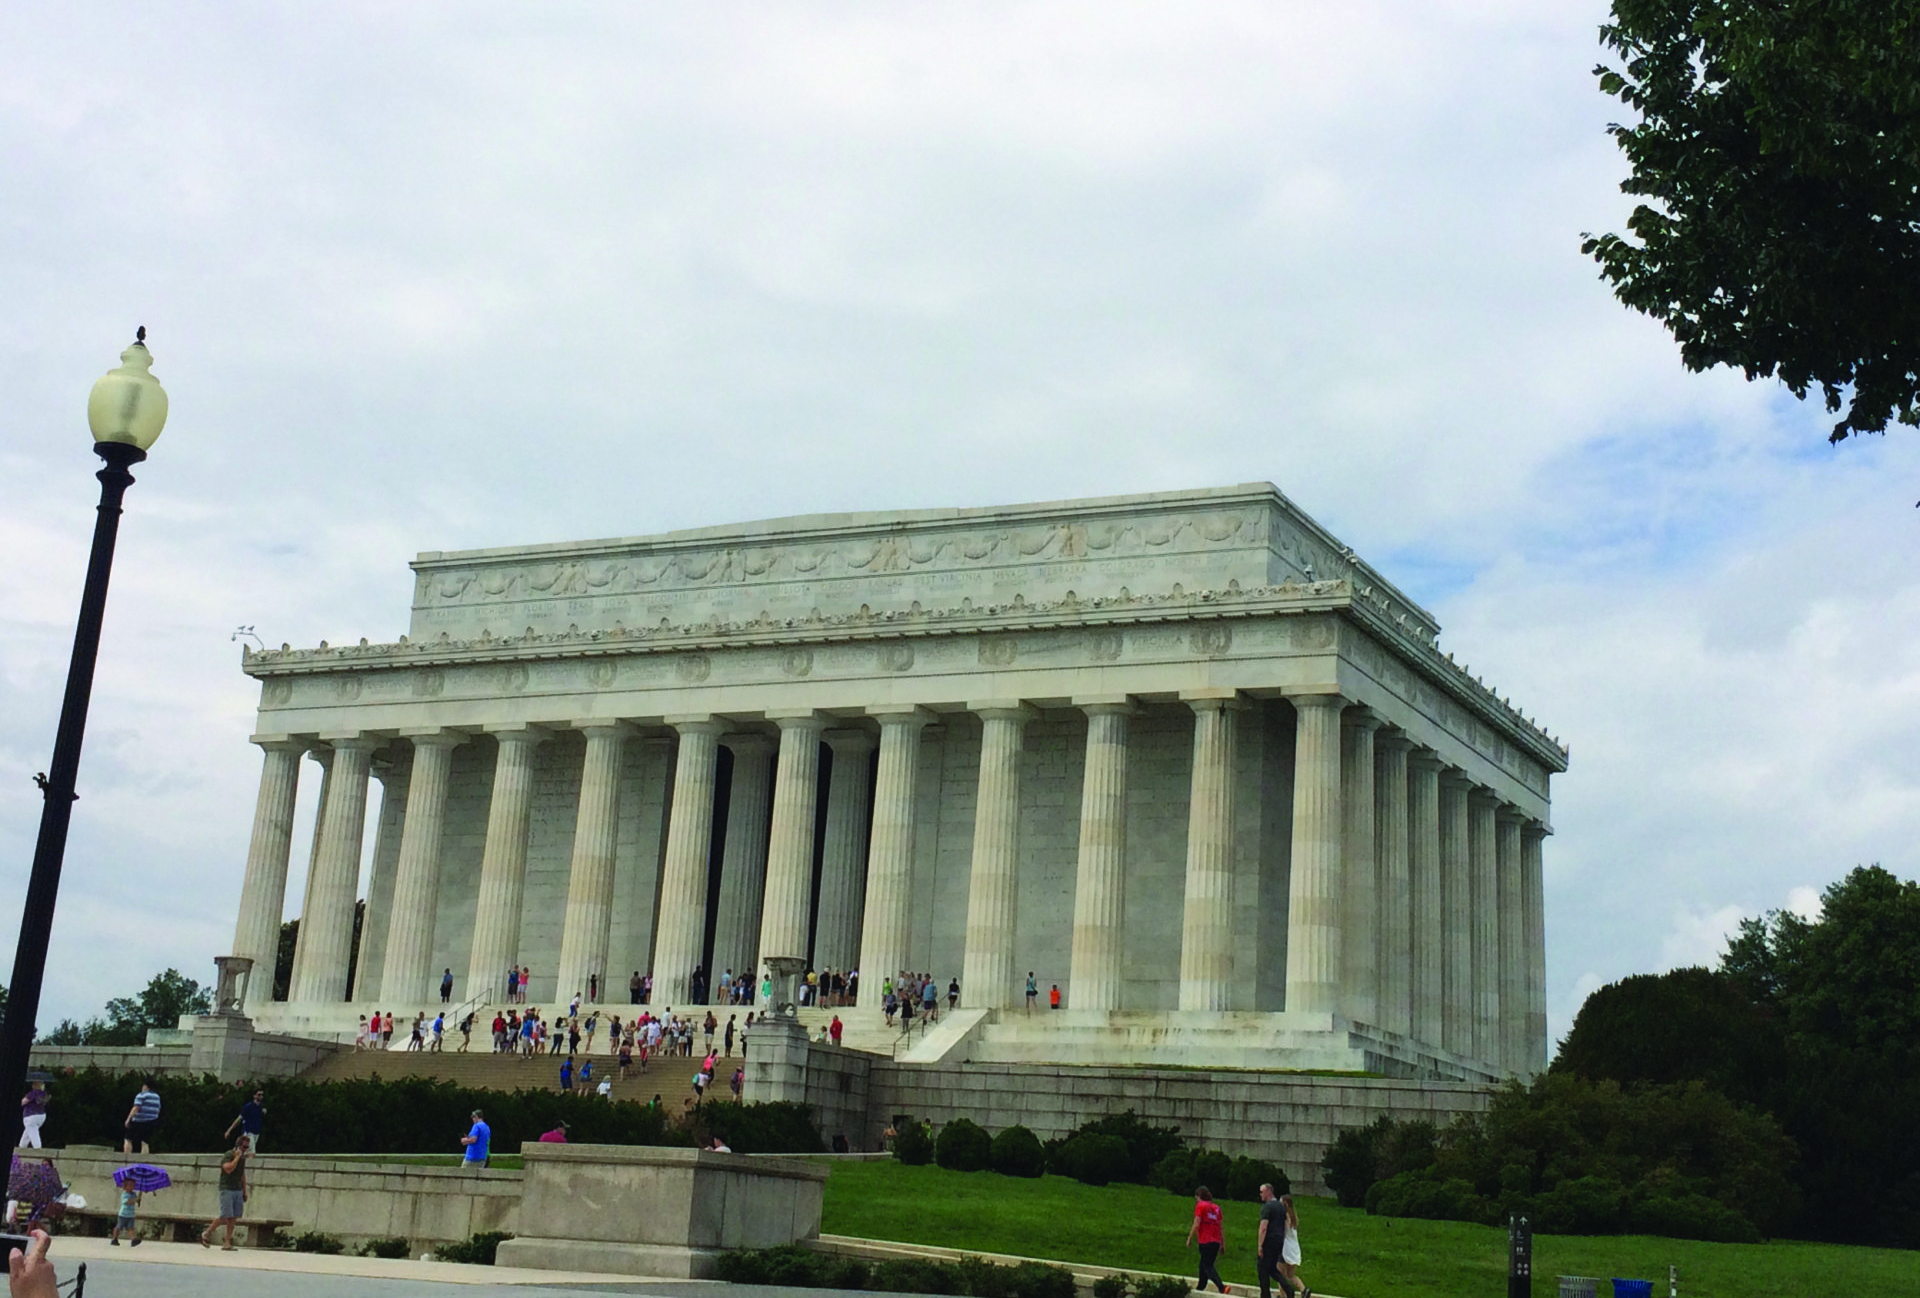 The Lincoln Memorial, dedicated in 1922 (Author Photo)